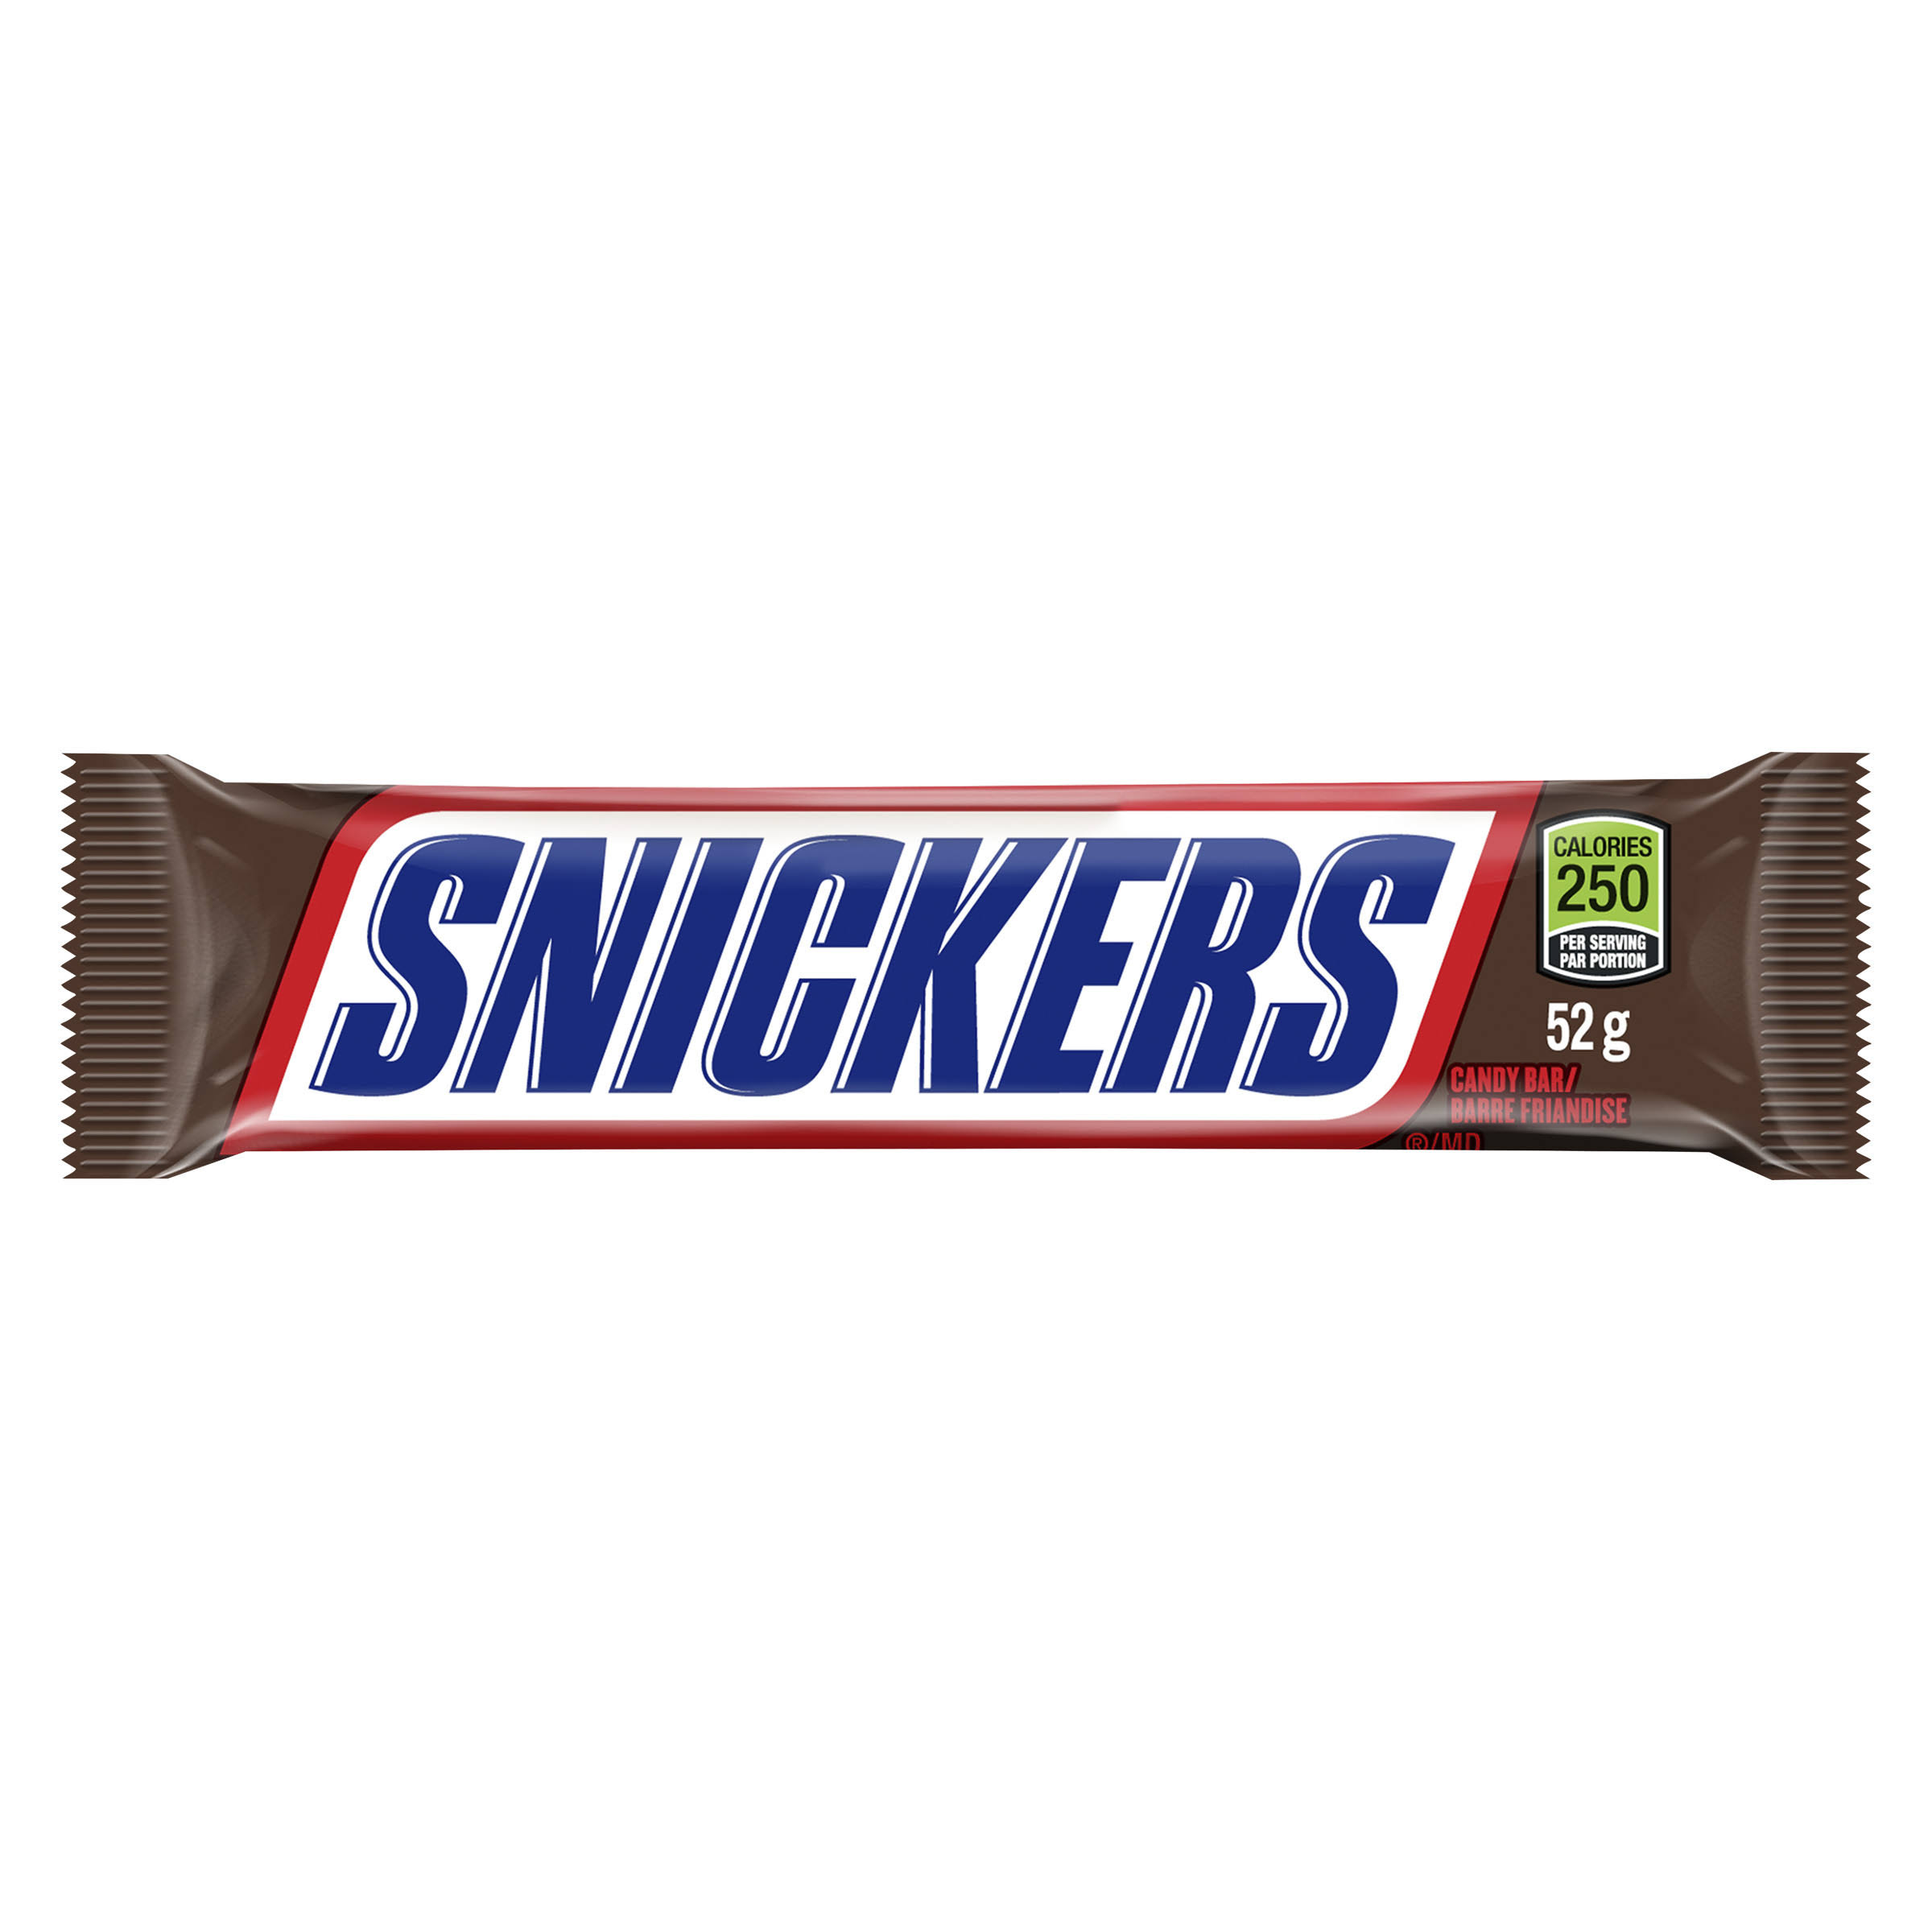 Snickers Chocolate Bar - 52g